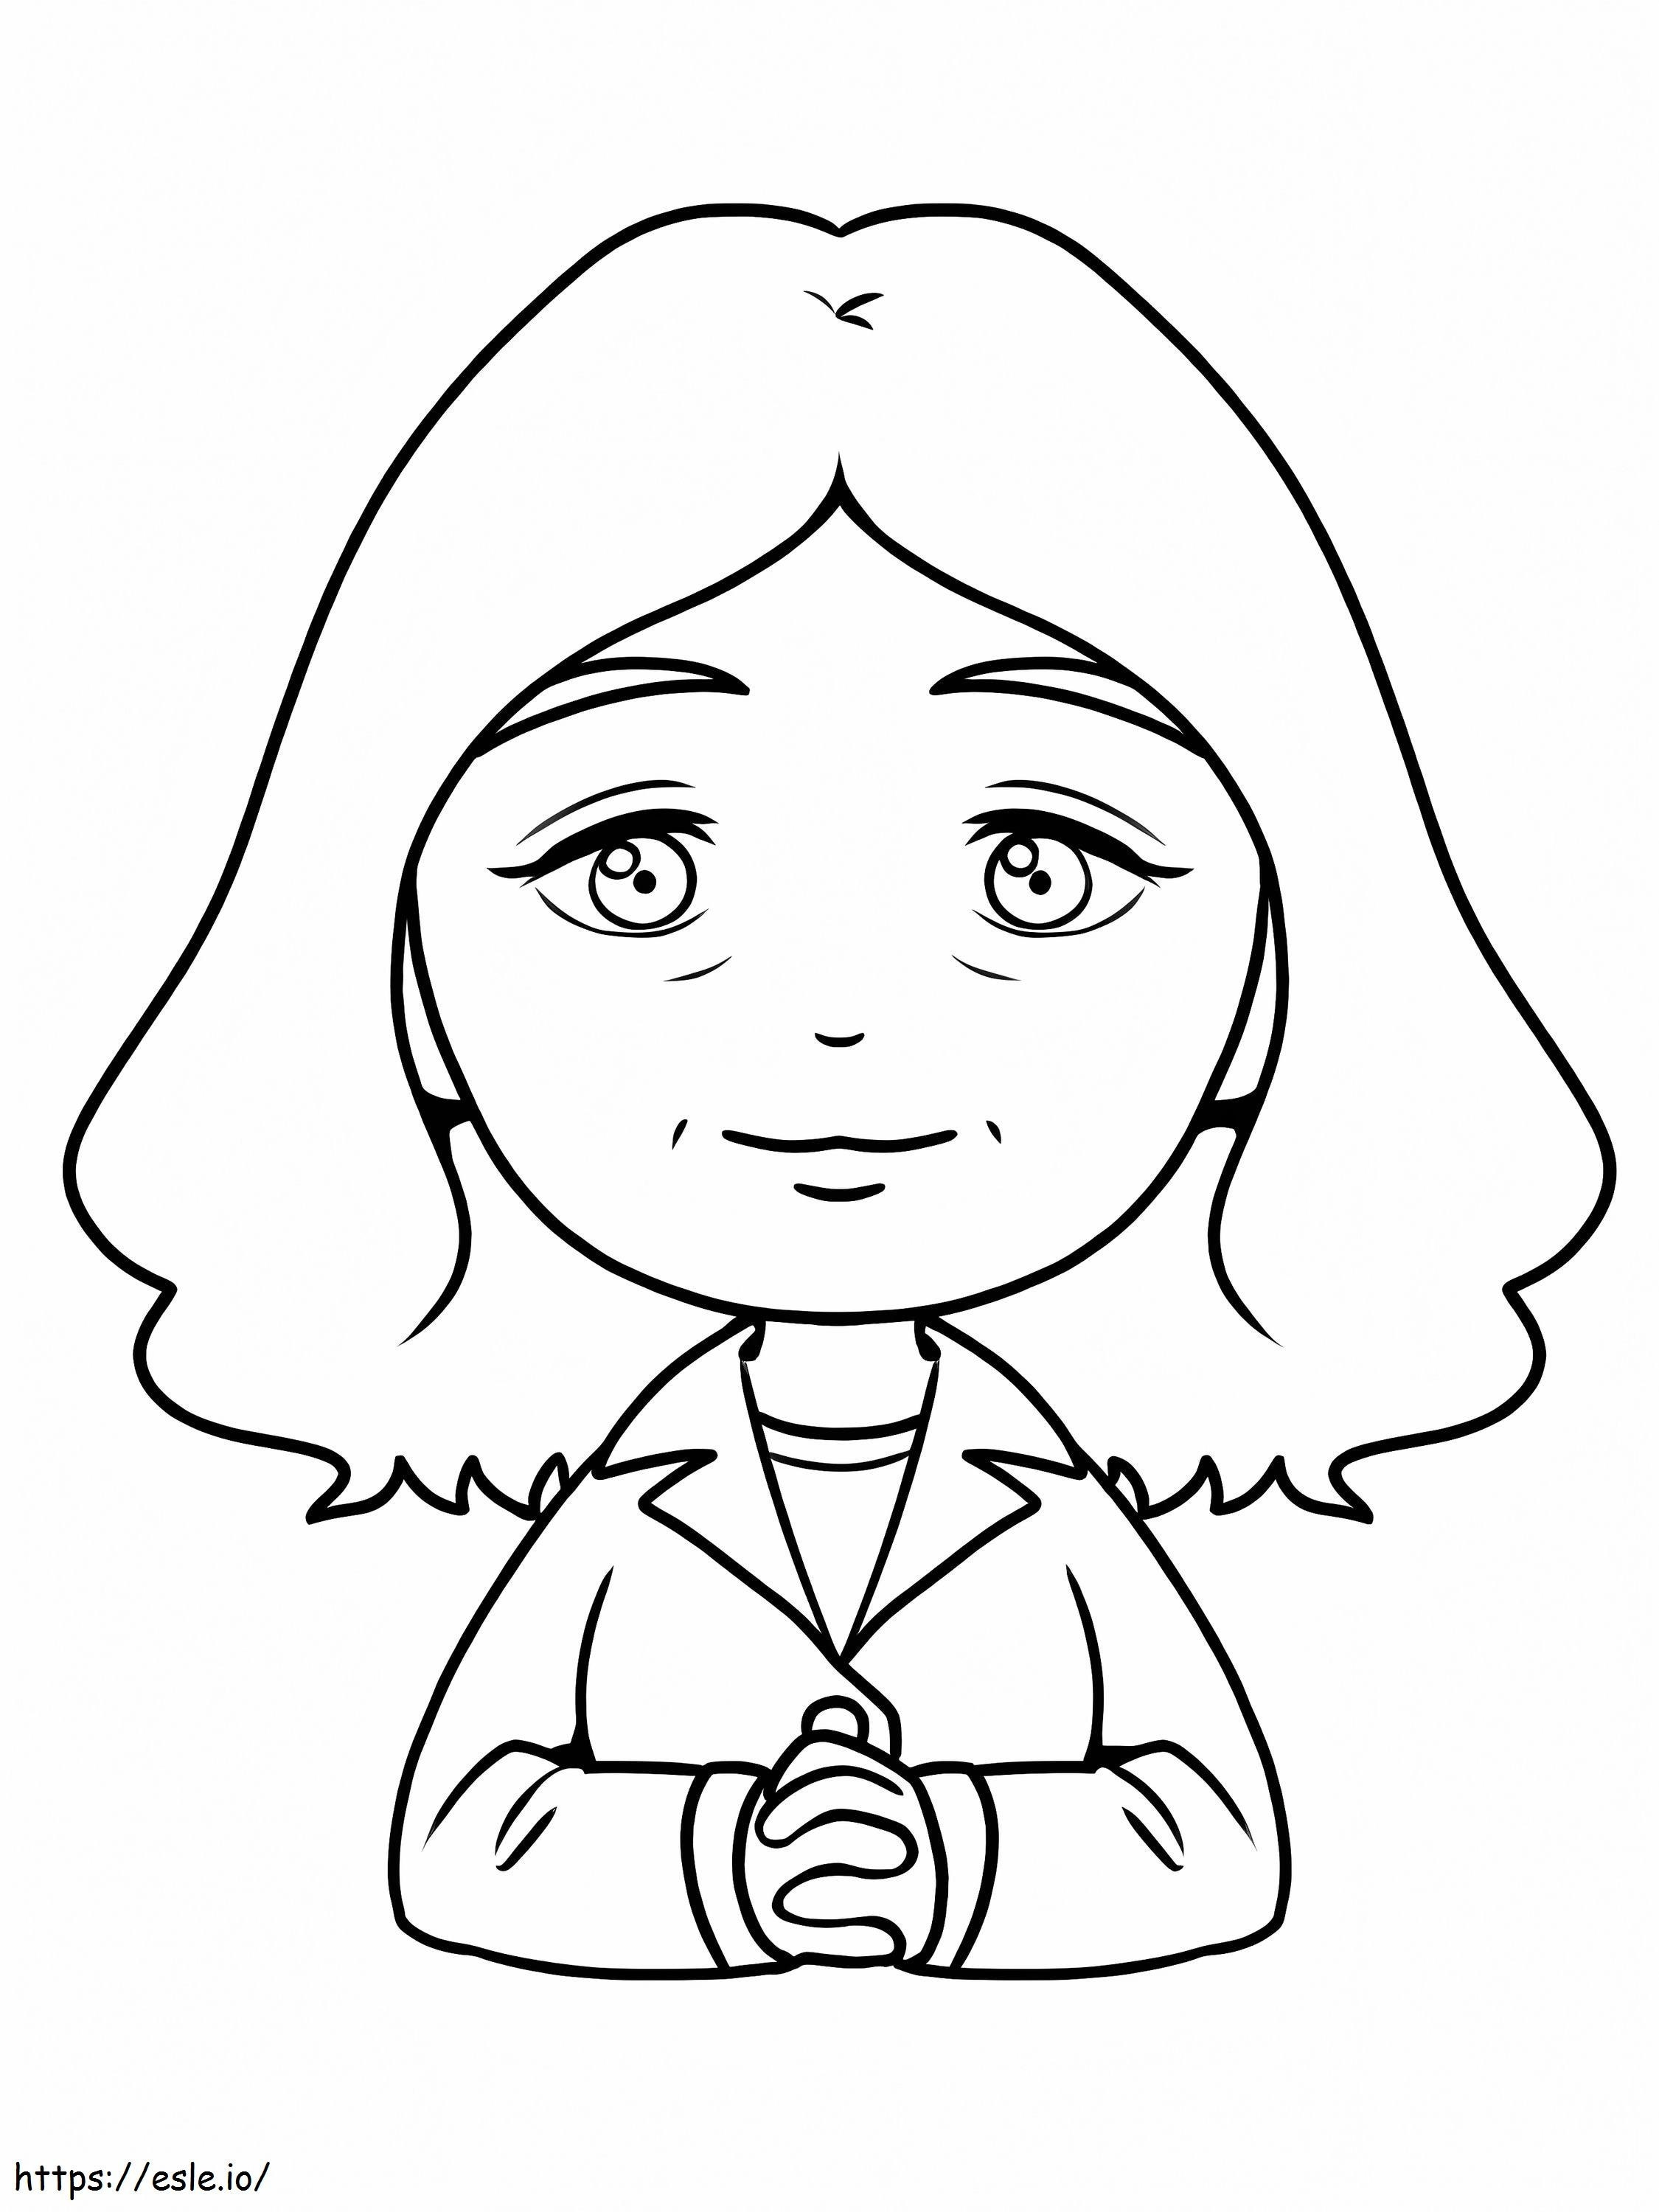 Doctor Theresa Tam coloring page